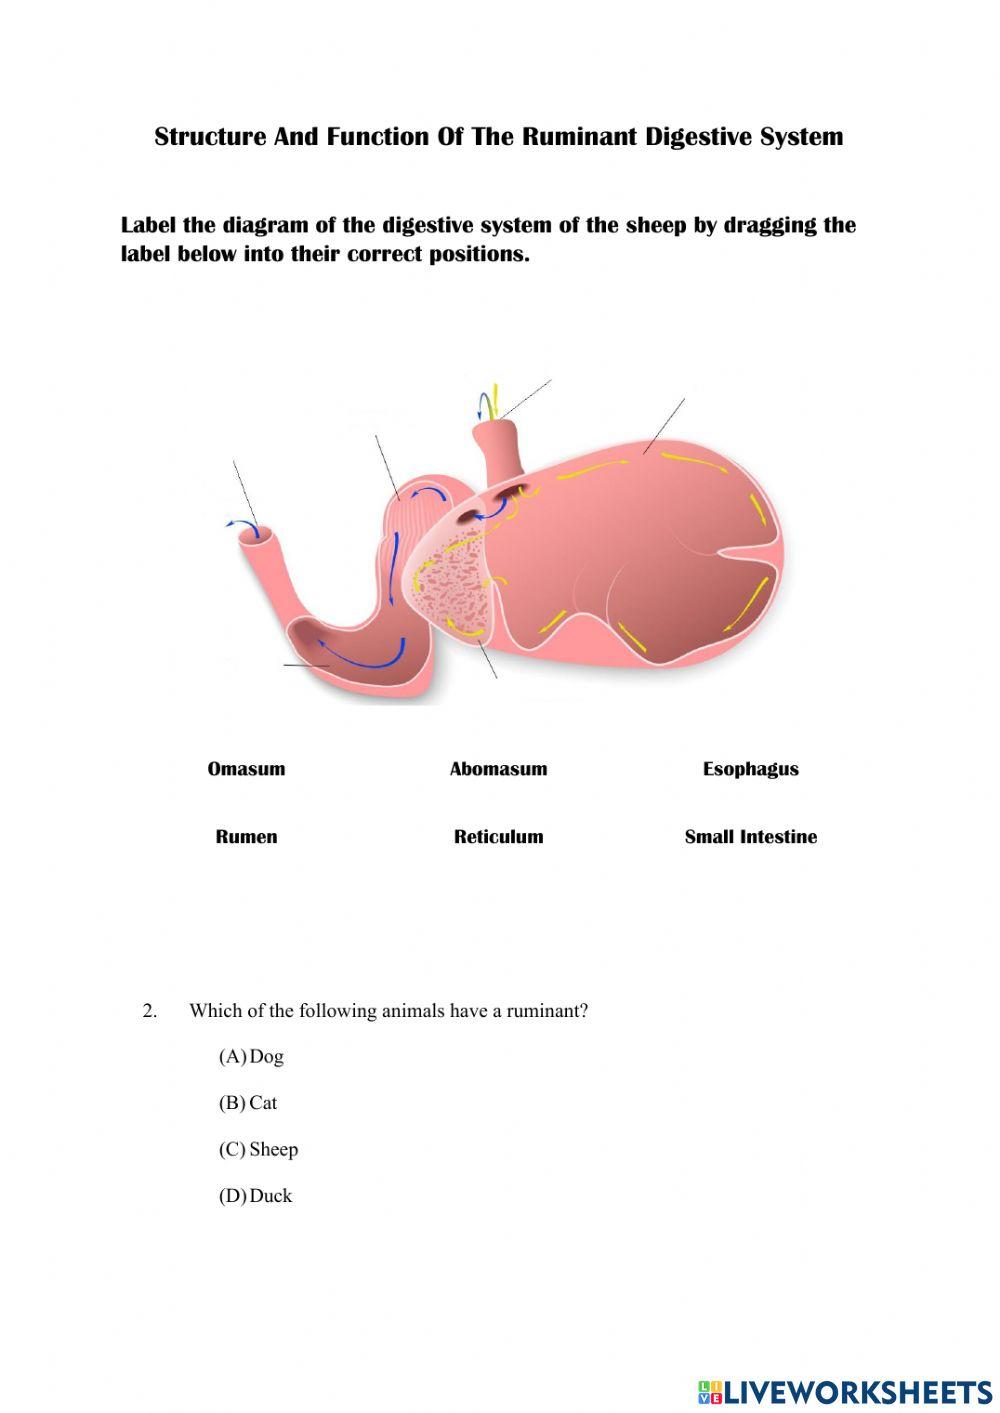 Structure And Function Of The Ruminant Digestive System